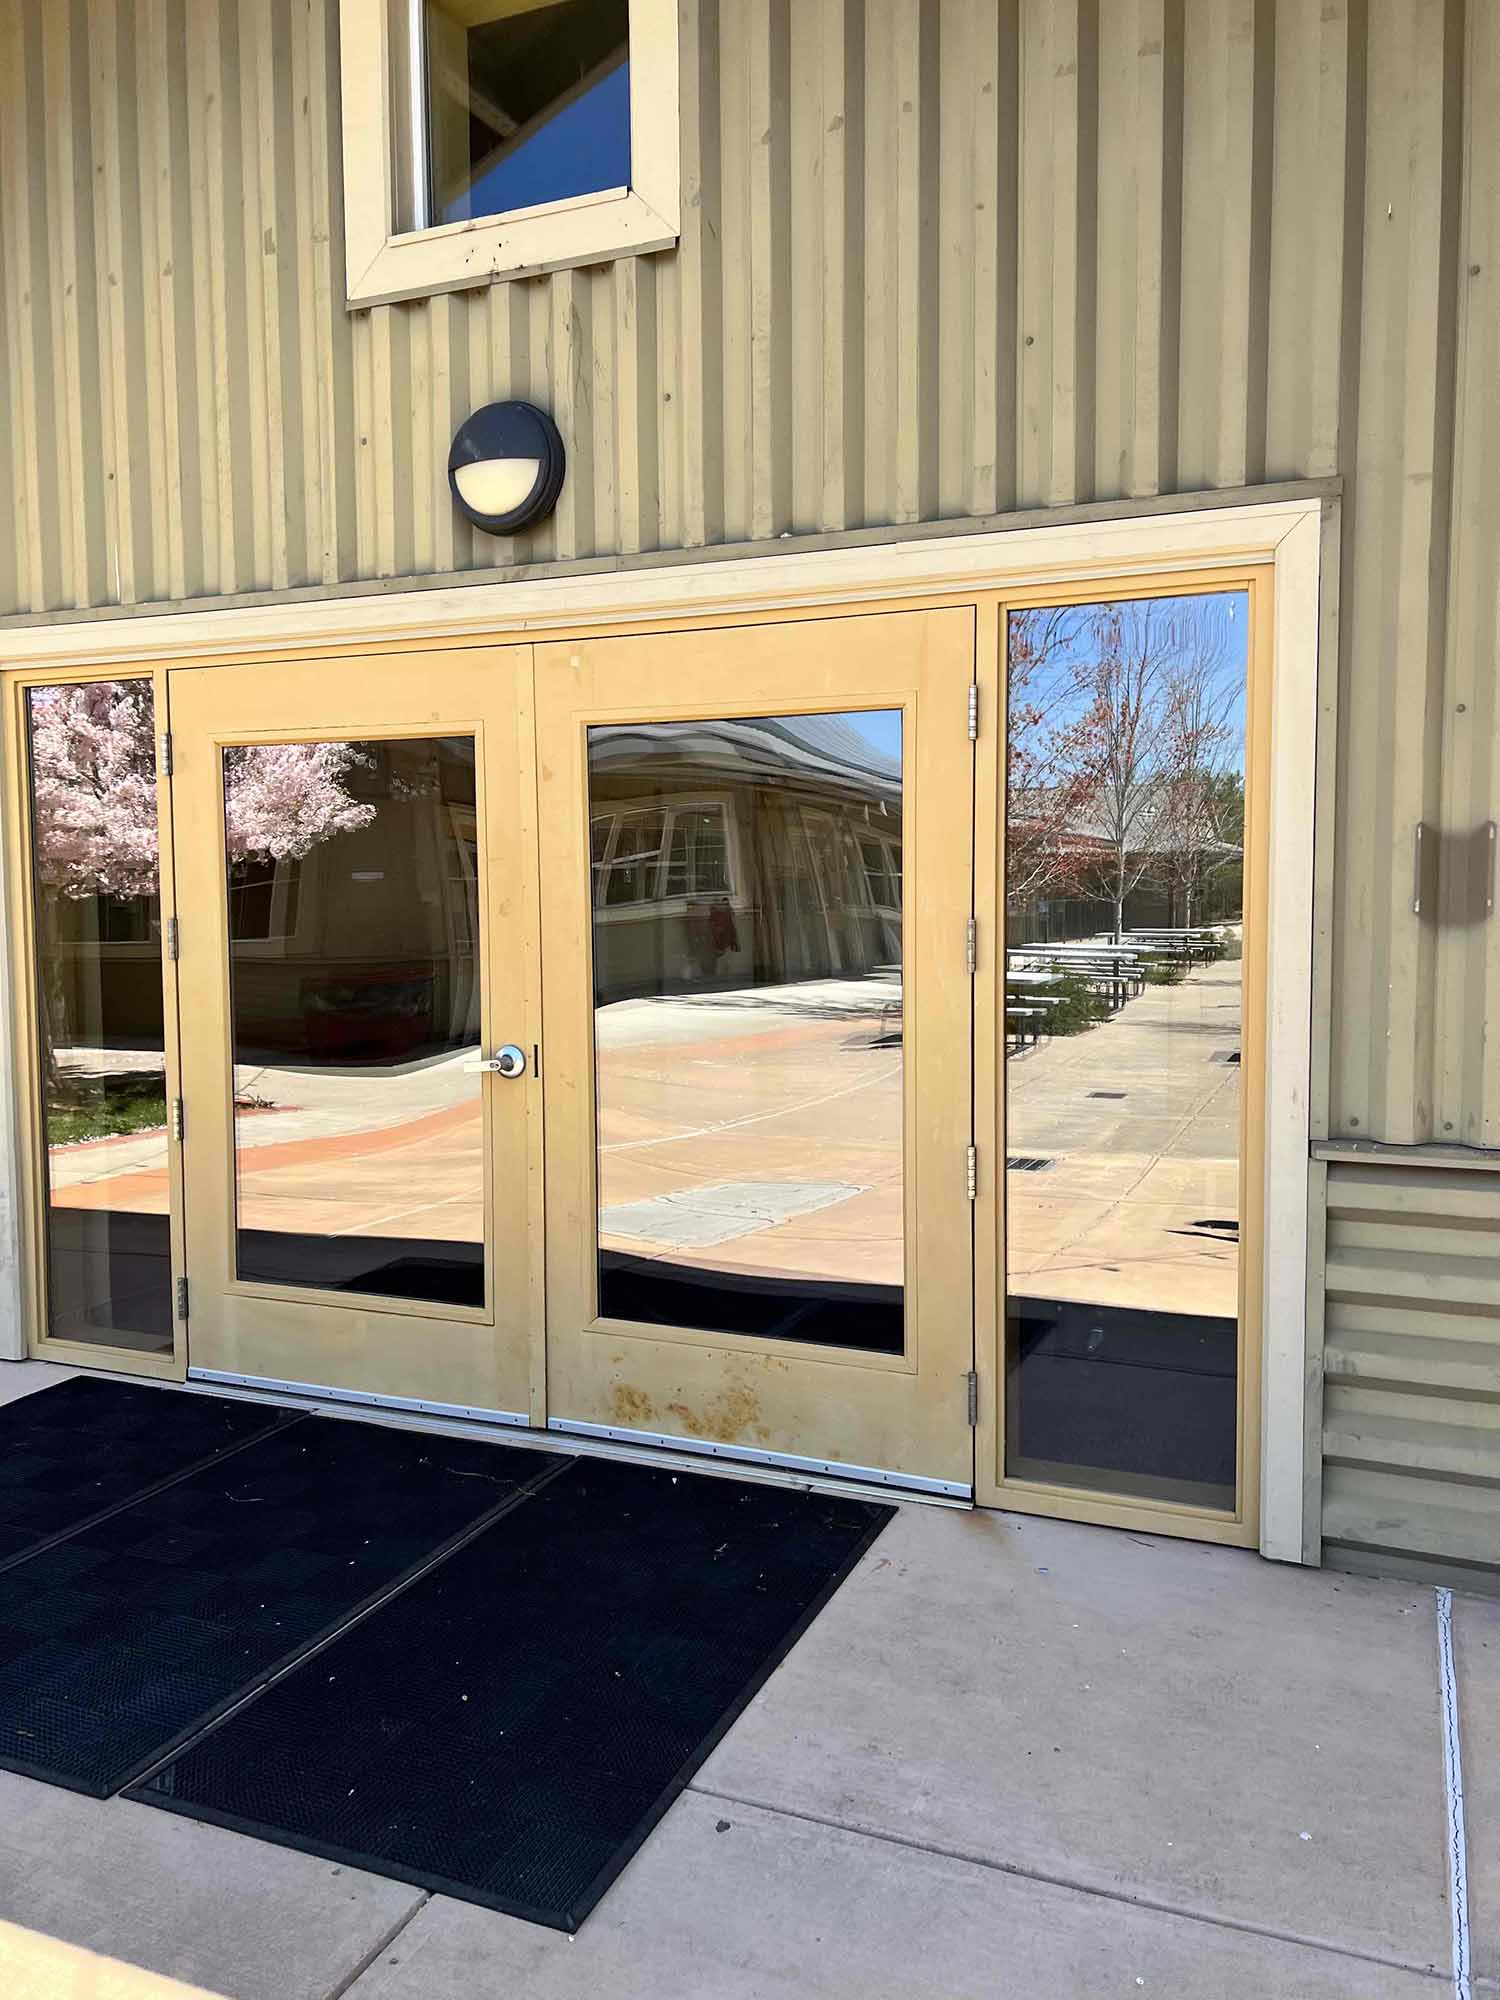 3M Safety Window Film For Schools in Sonoma. Get a free estimate for your school from the Bay Area's authorized 3M Window Film Dealer, ClimatePro.